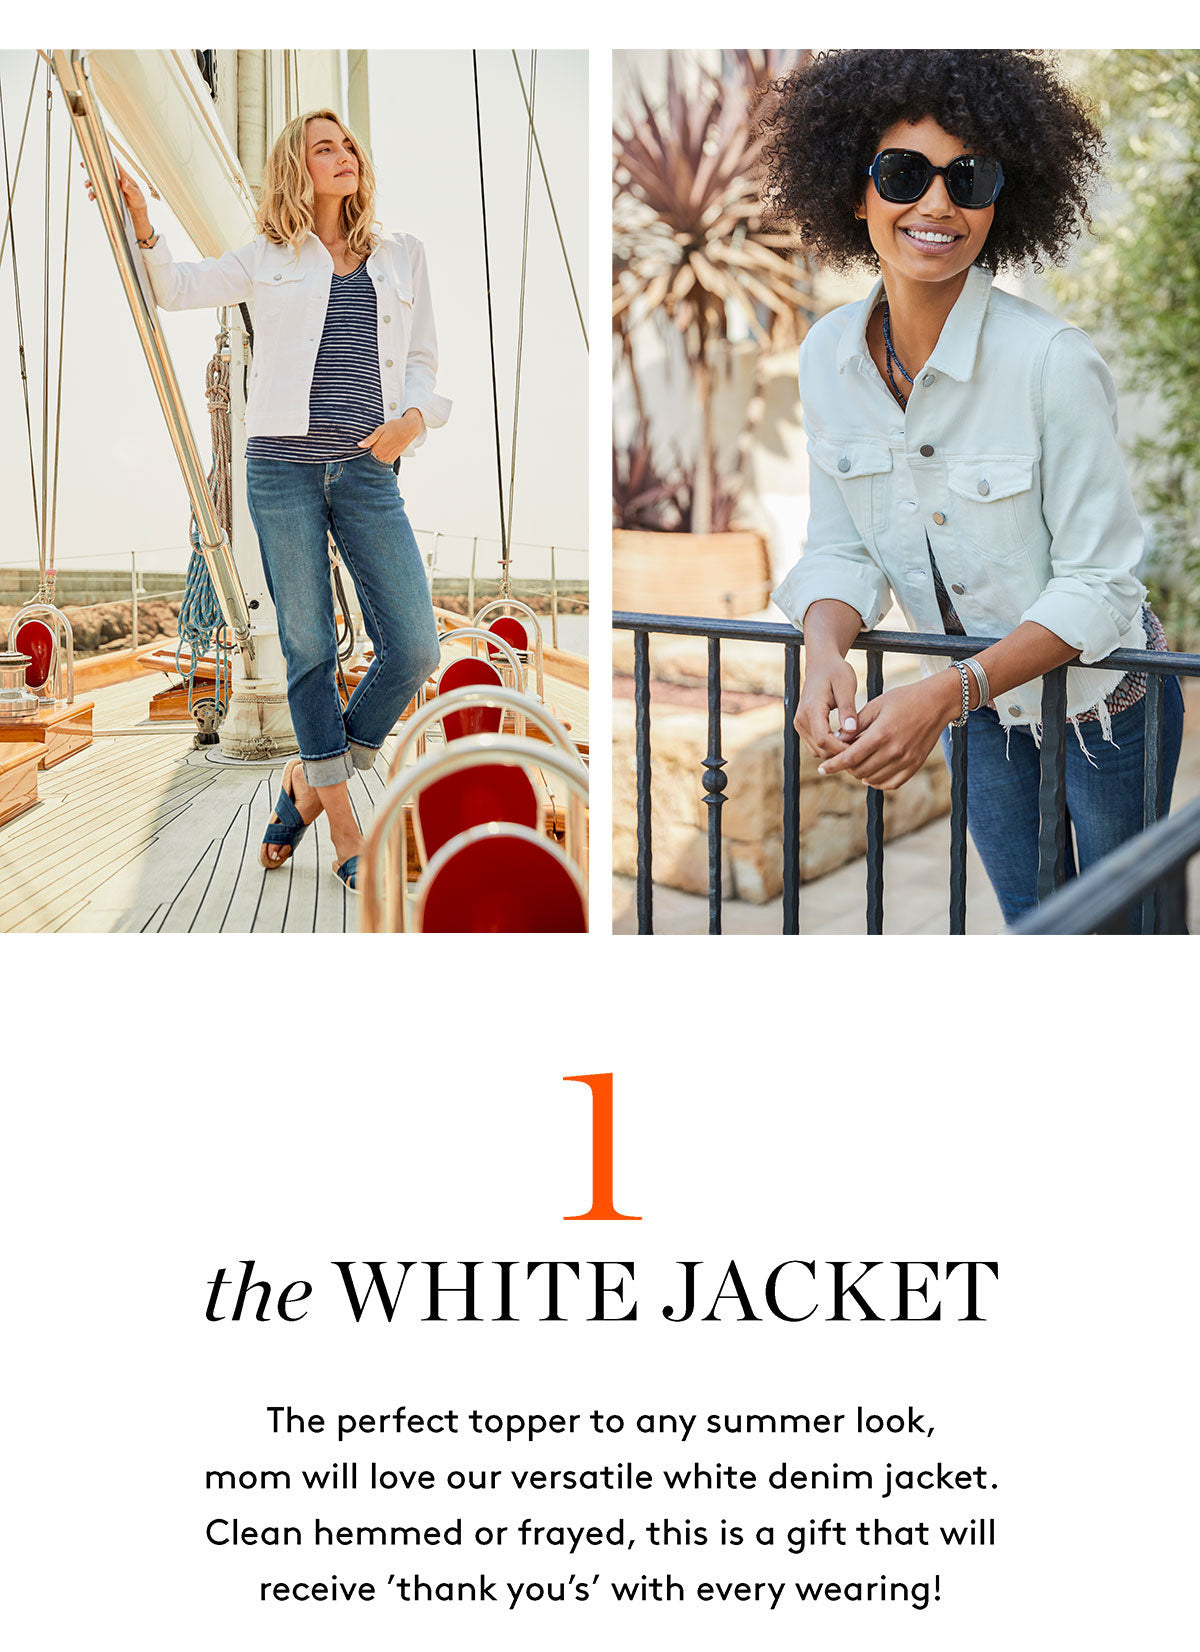 the WHITE JACKET The perfect topper to any summer look, mom will love our versatile white denim jacket. Clean hemmed or frayed, this is a gift that will receive 'thank you's' with every wearing!